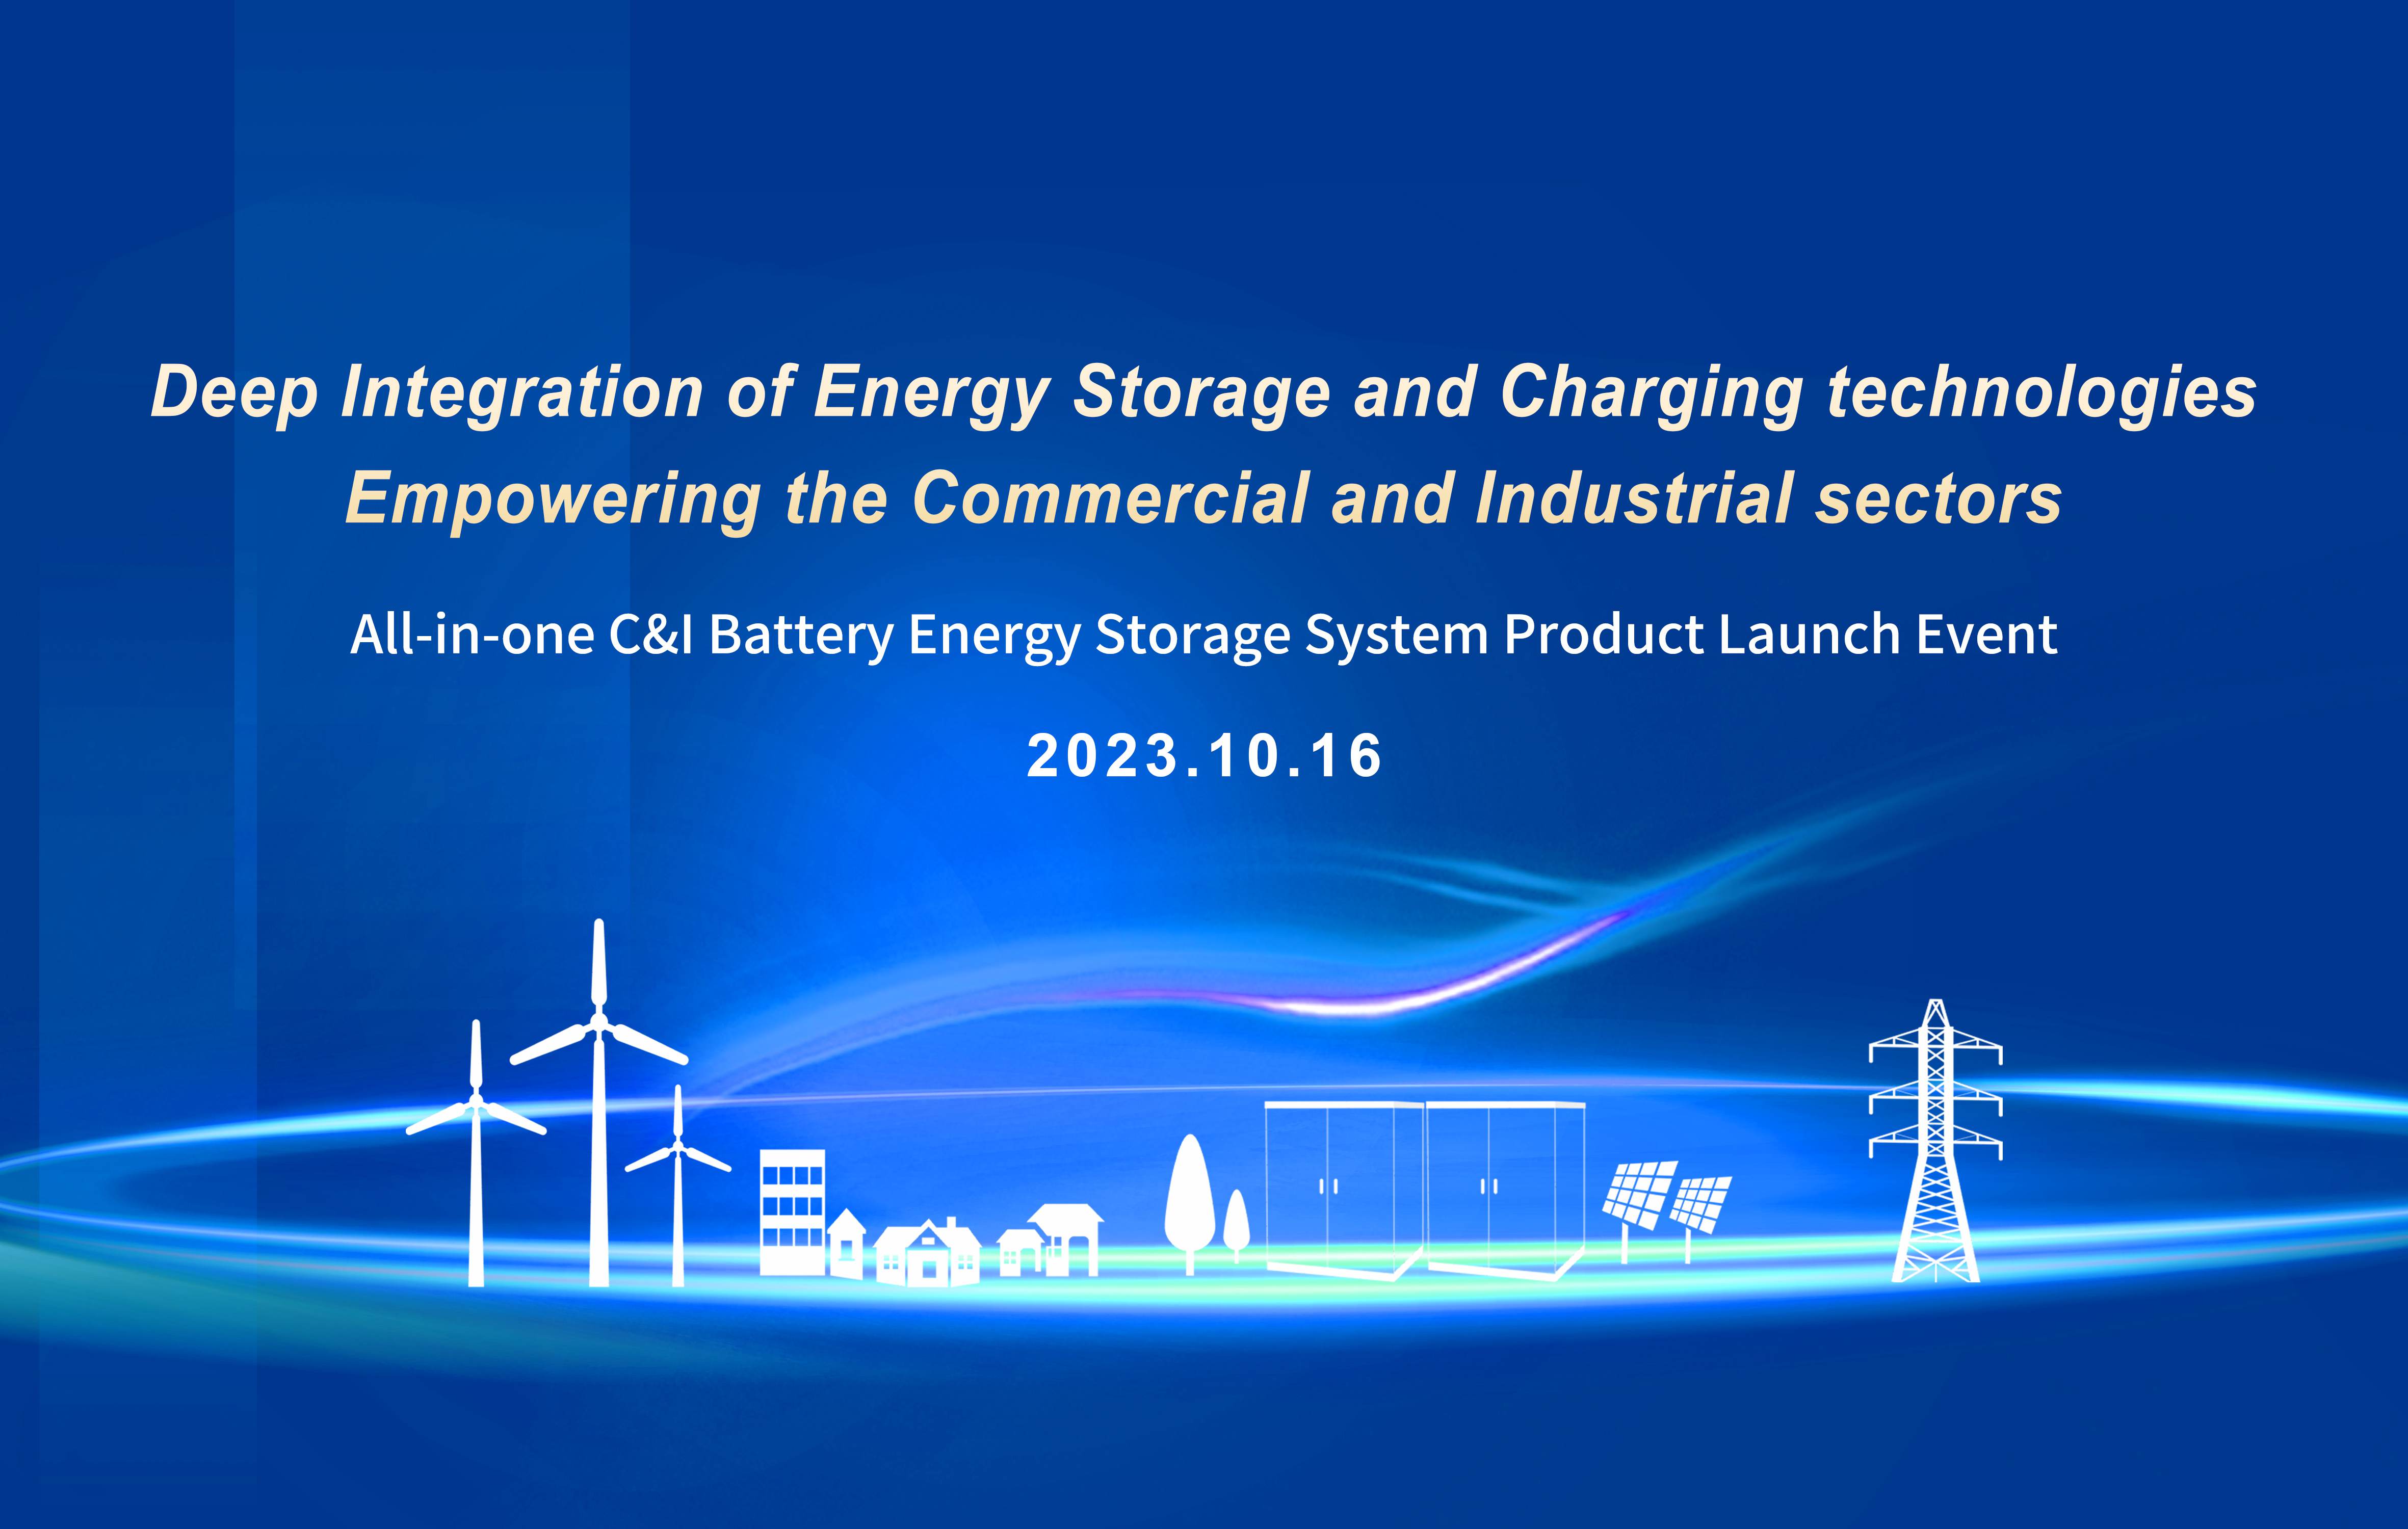  Topband Battery C&I Battery Energy Storage System launch event was successfully held